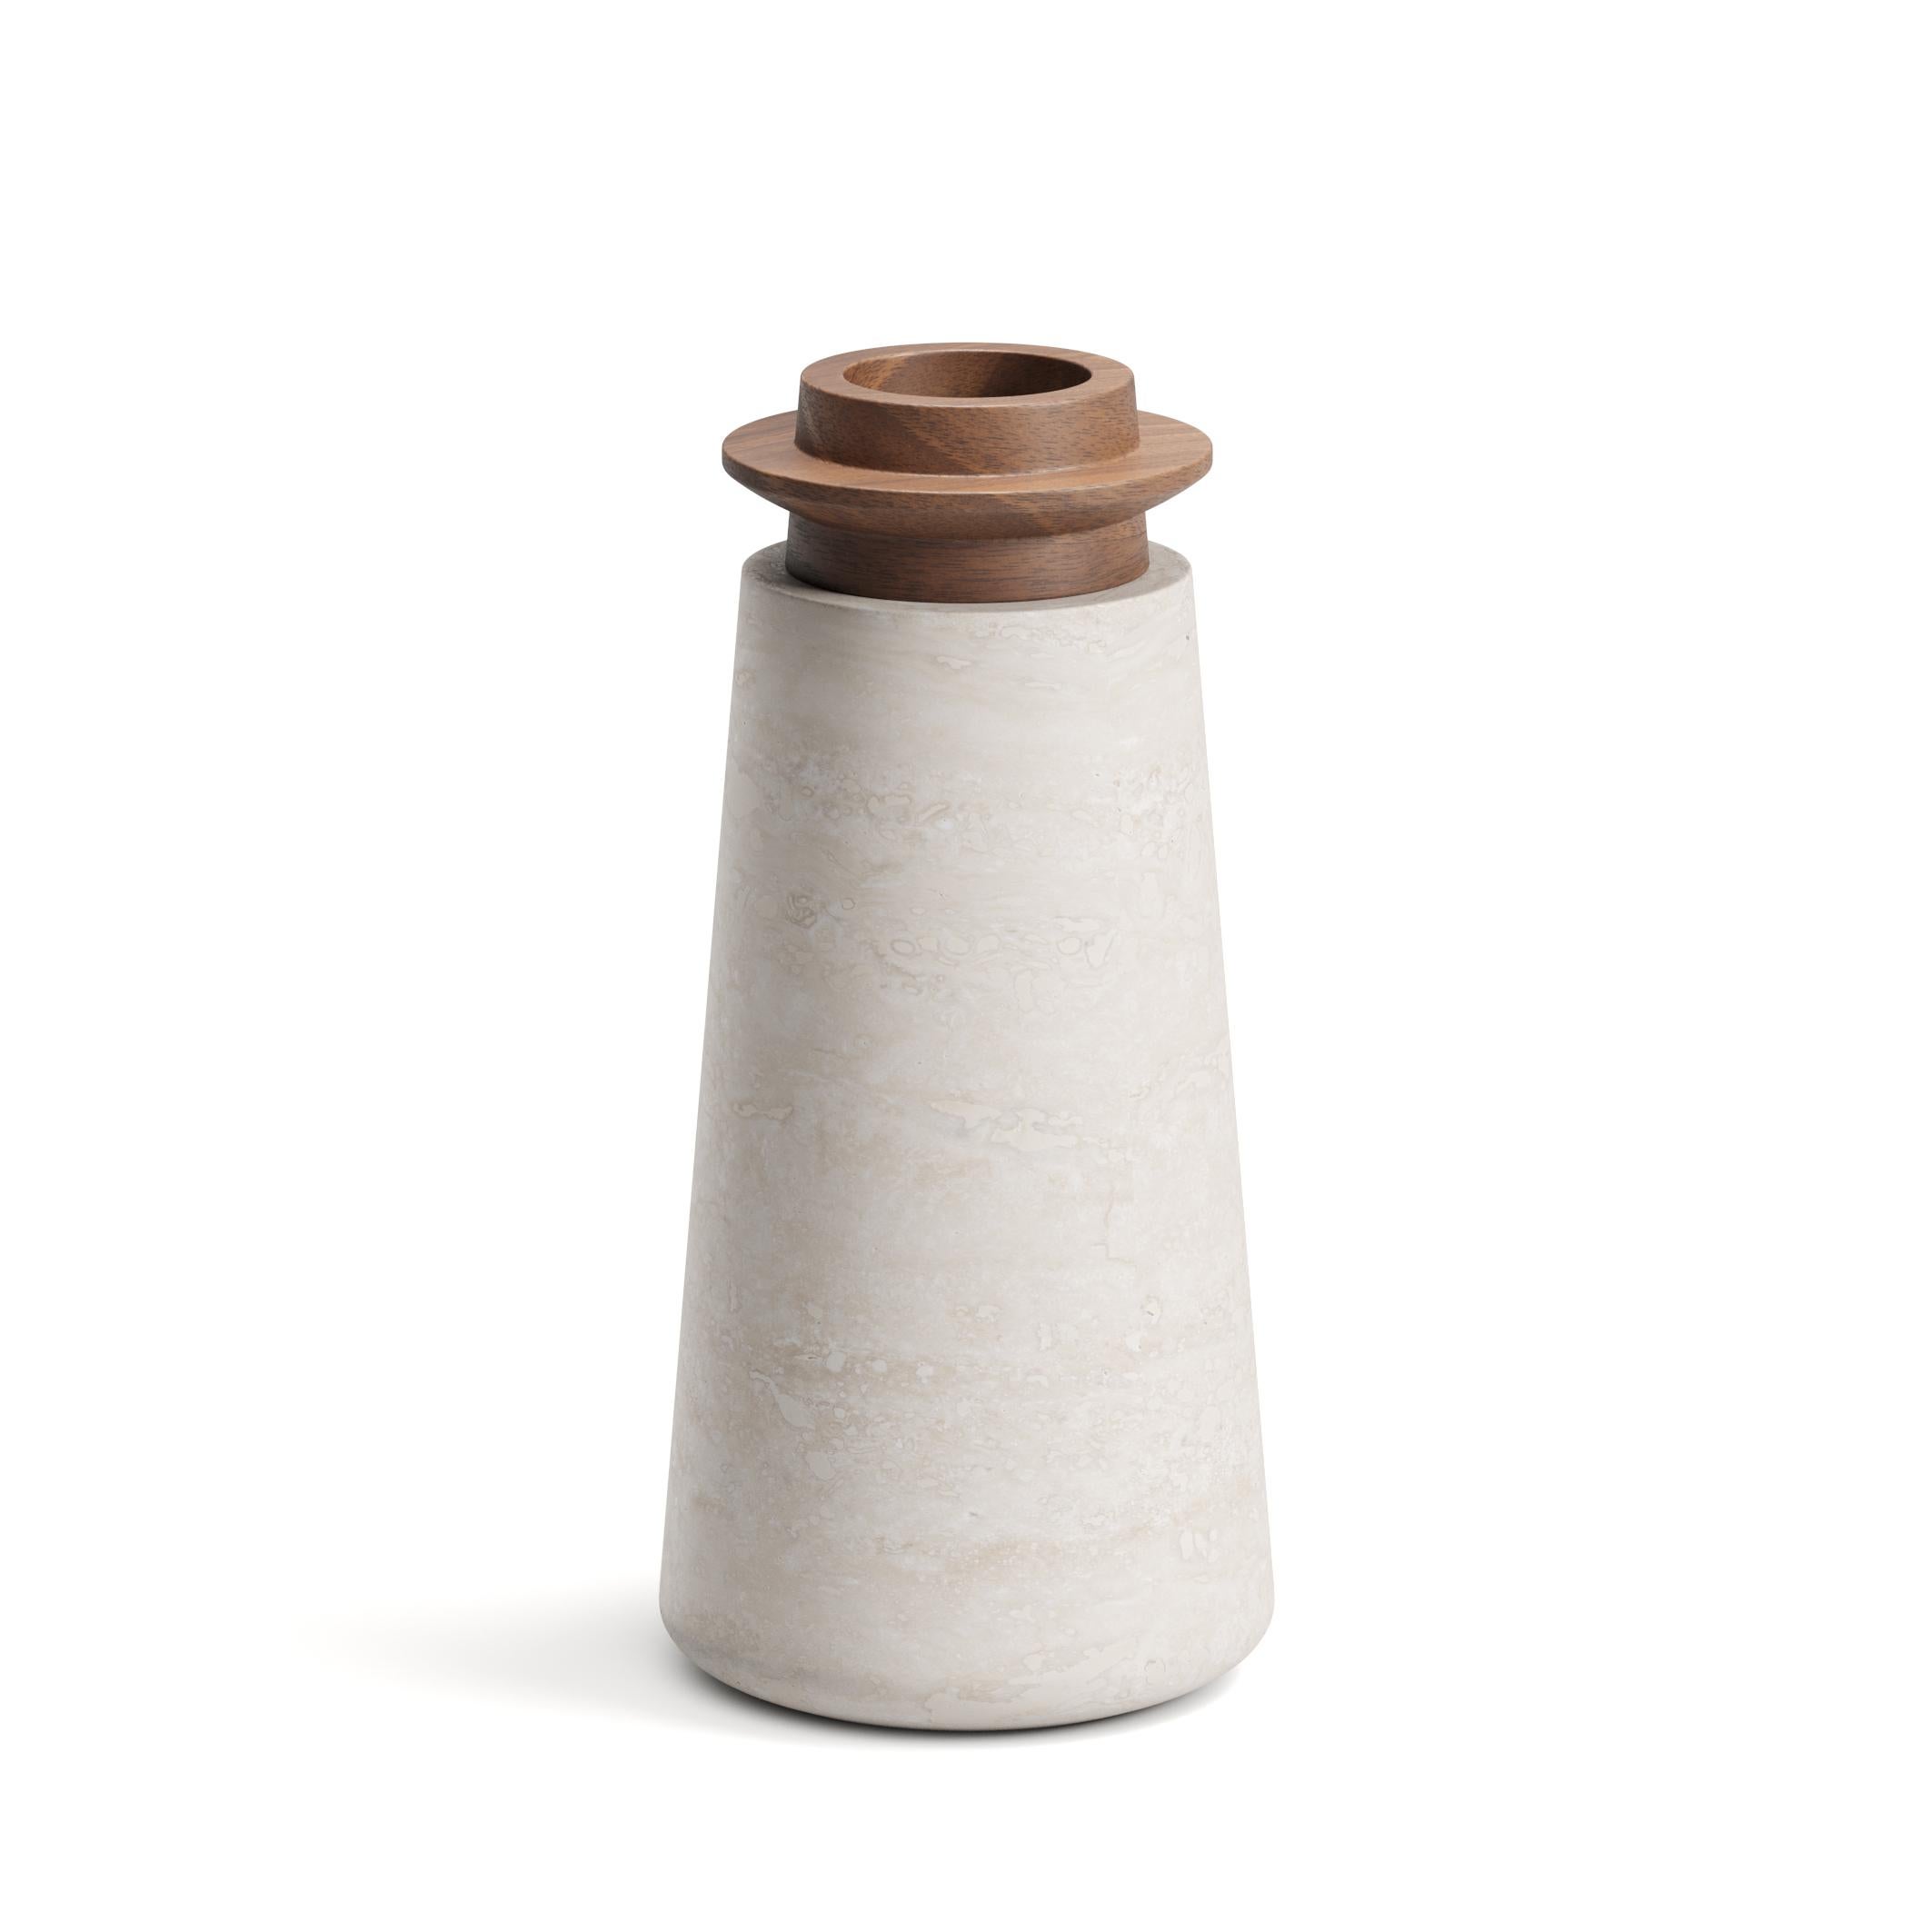 Walnut Trivoli Vase L by Ivan Colominas
Dimensions: D 15 x H 31.7 cm
Materials: Travertino Navona and Walnut Wood.

TIVOLI COLLECTION:
TIVOLI, a picturesque city situated on the western slopes of the Sabine Hills, was the place that the Ancient